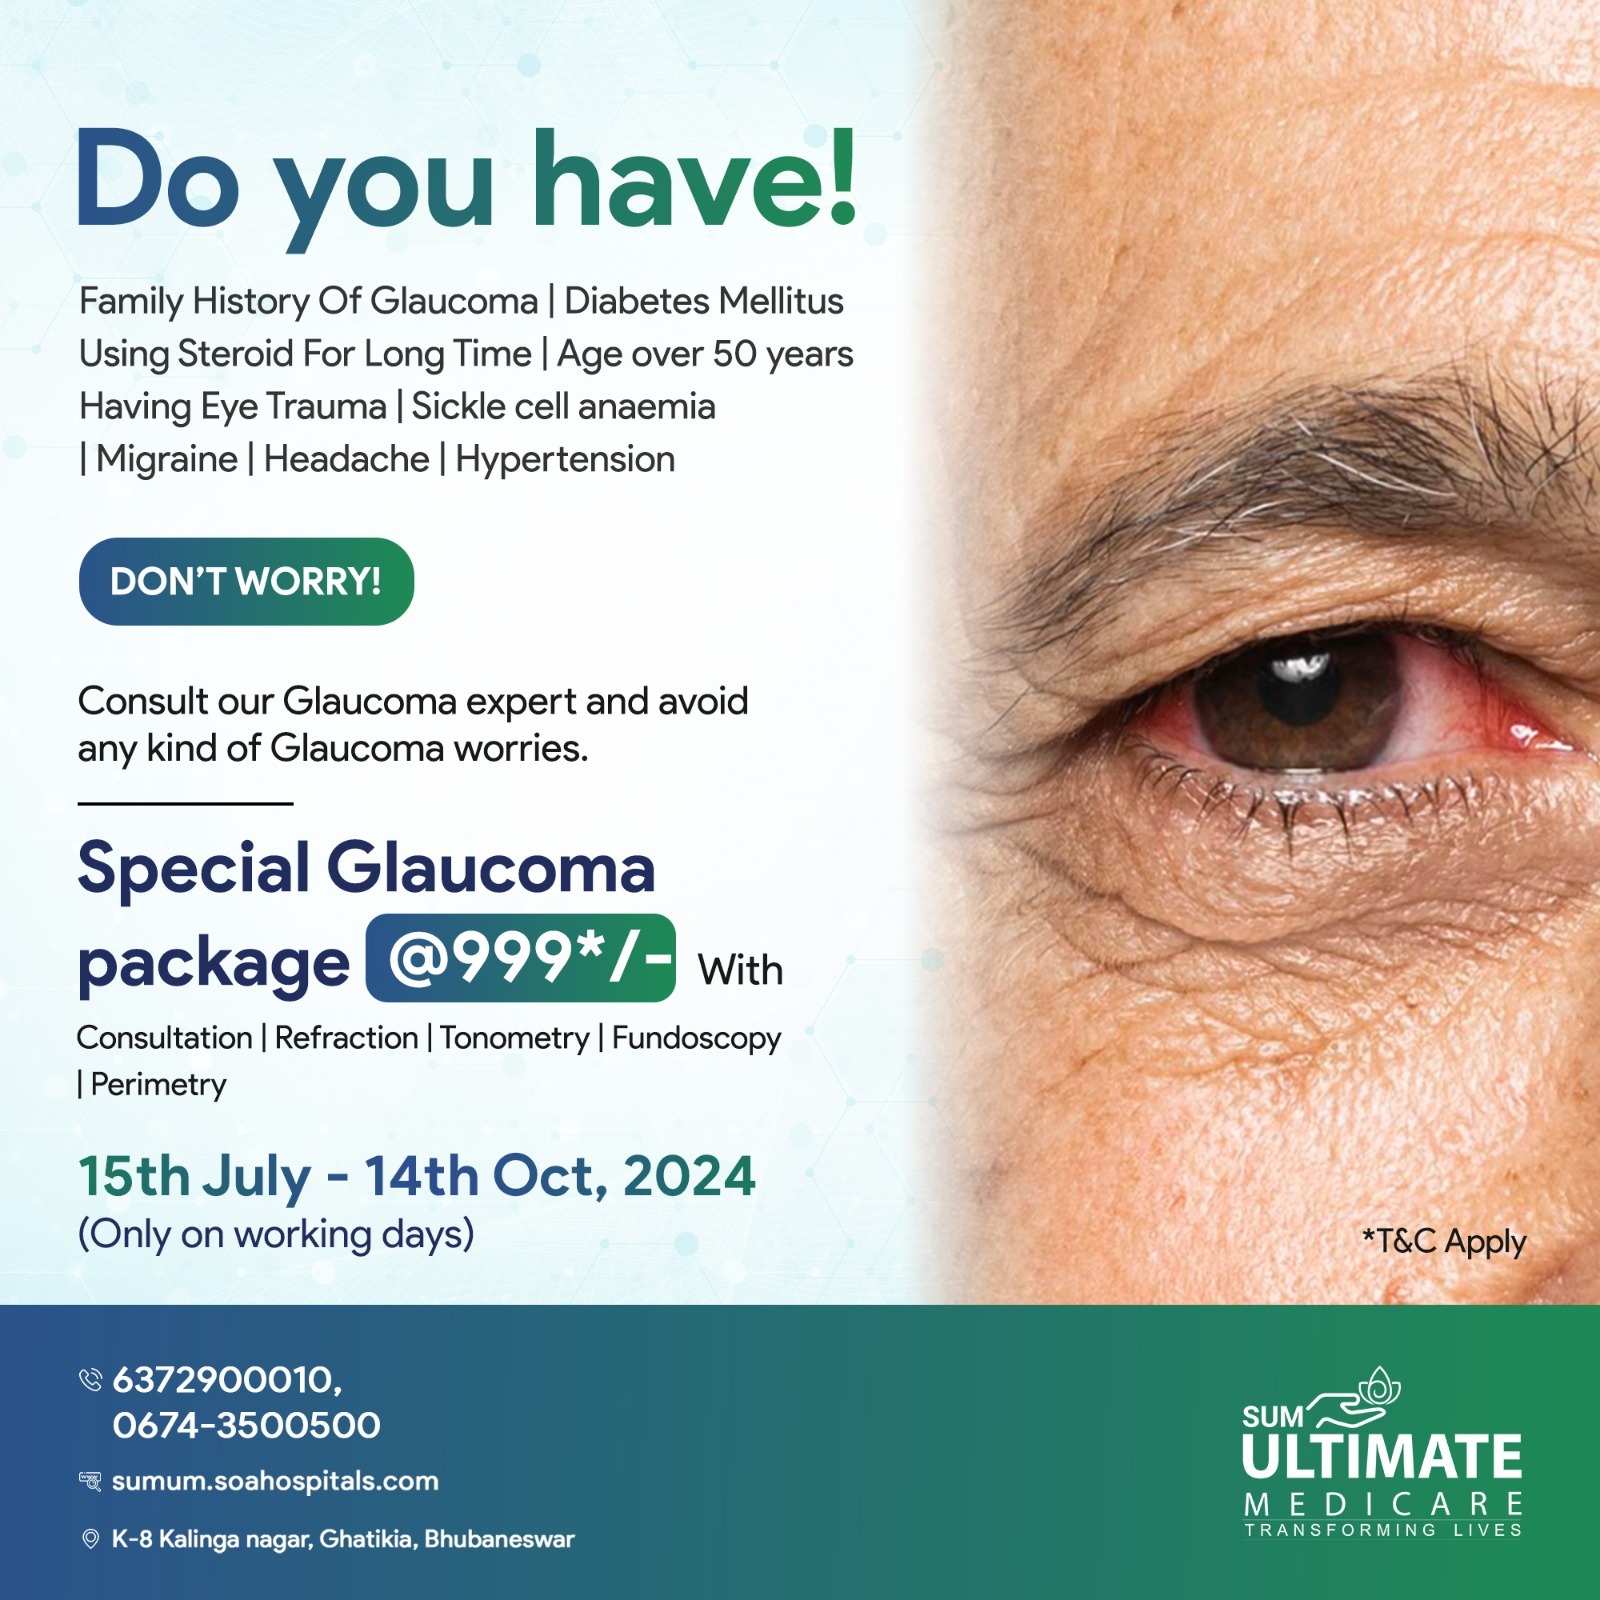 SPECIAL GLAUCOMA PACKAGE